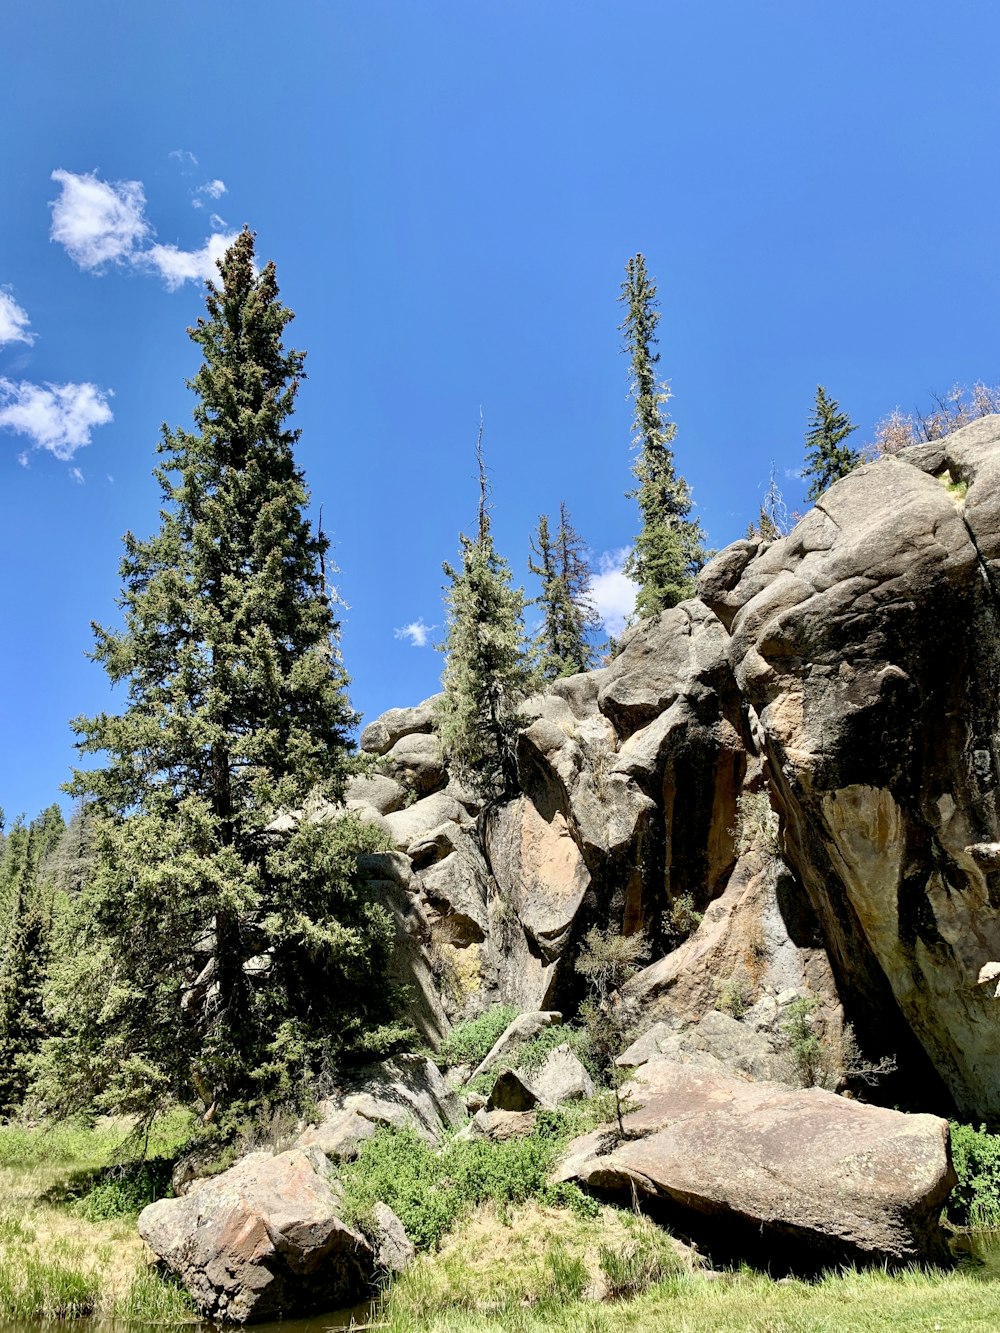 green pine trees on brown rocky mountain under blue sky during daytime